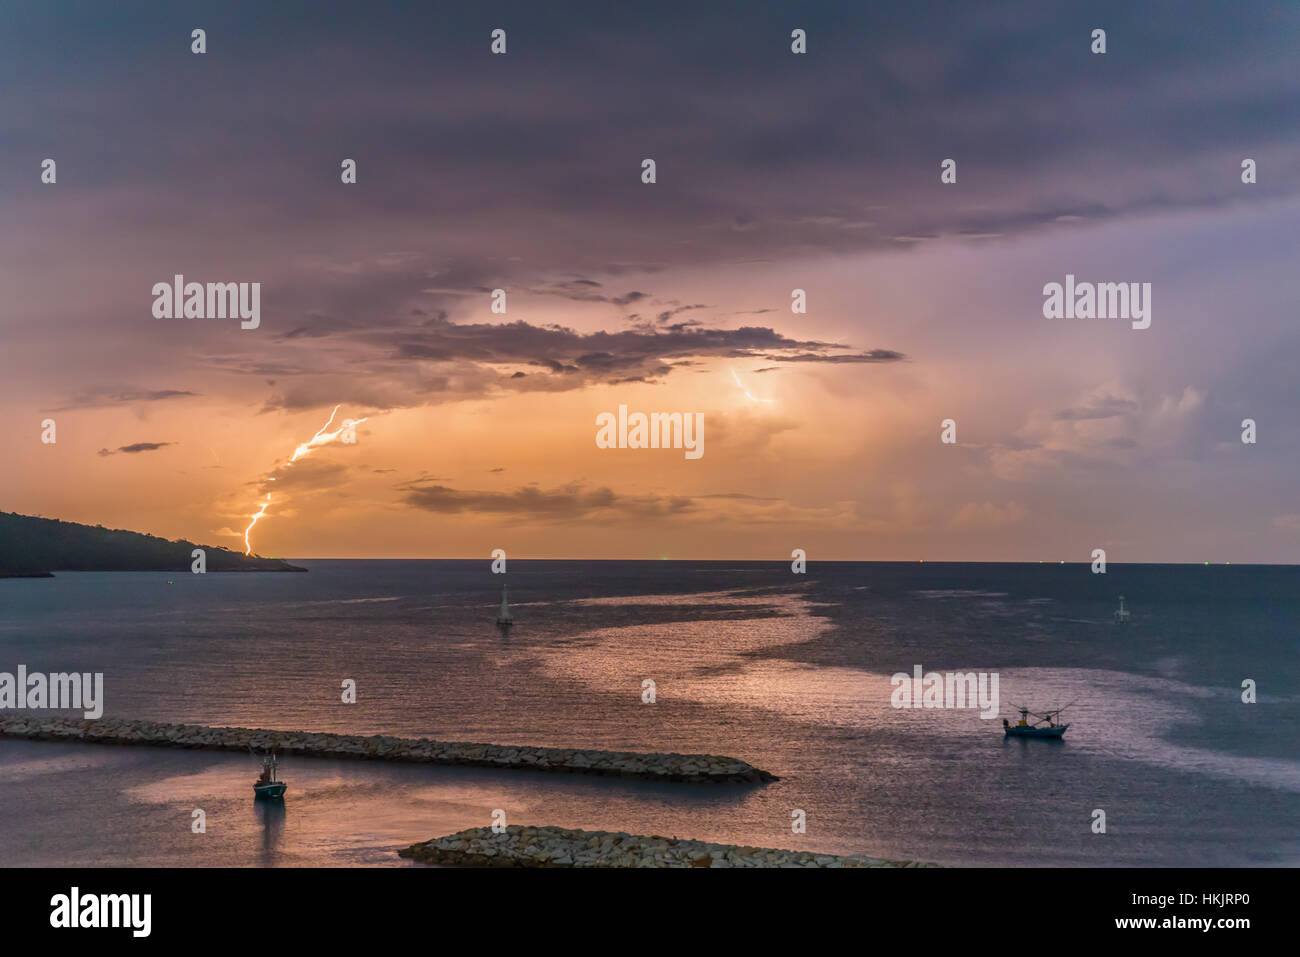 Lightning in the ocean of Thiland Stock Photo